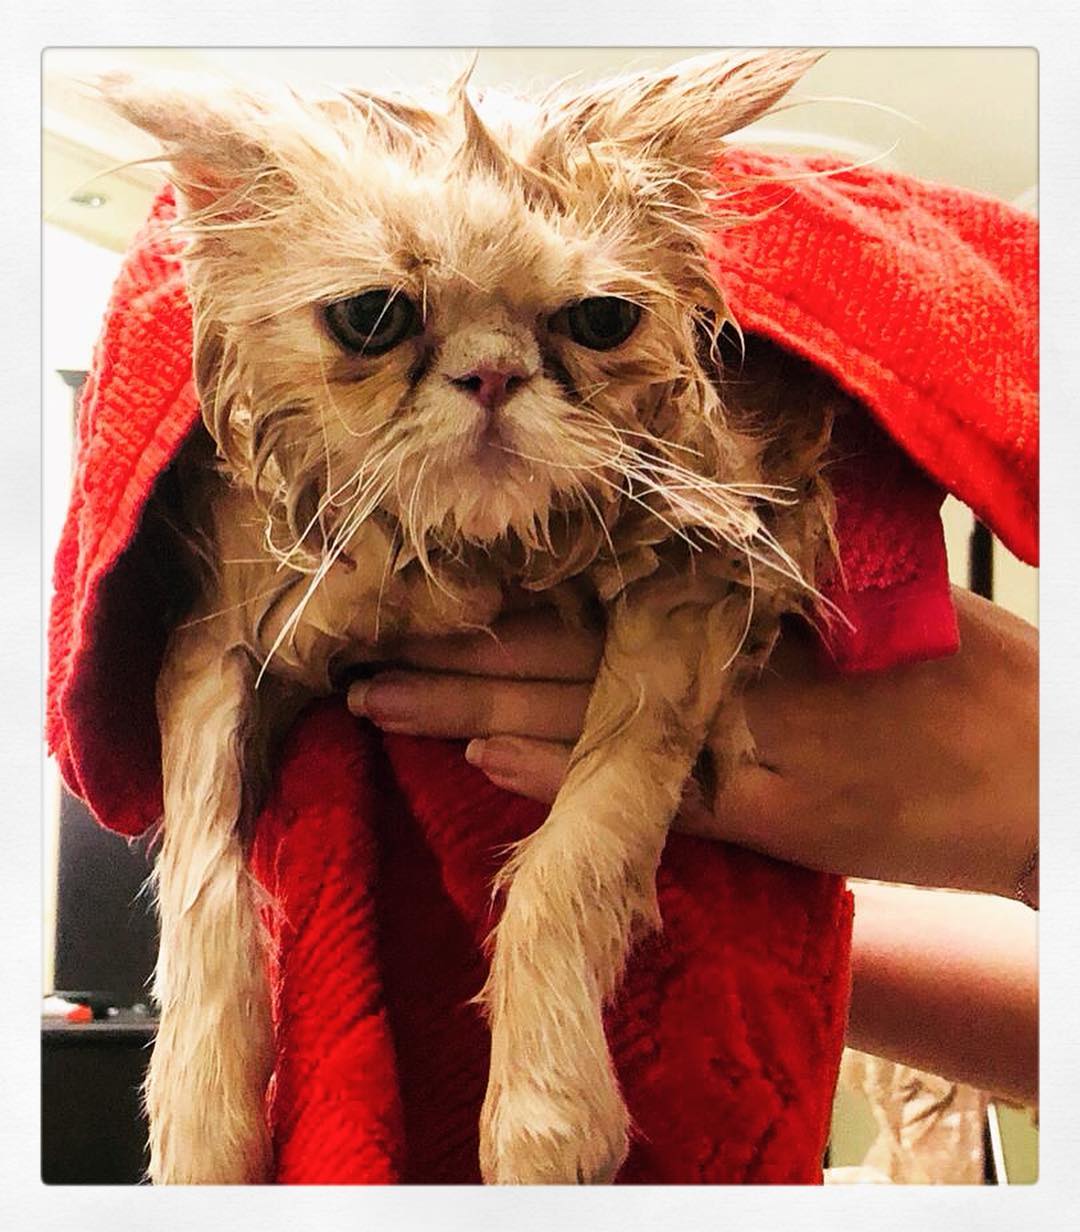 A soaking wet Persian Cat in a towel while being held by a person